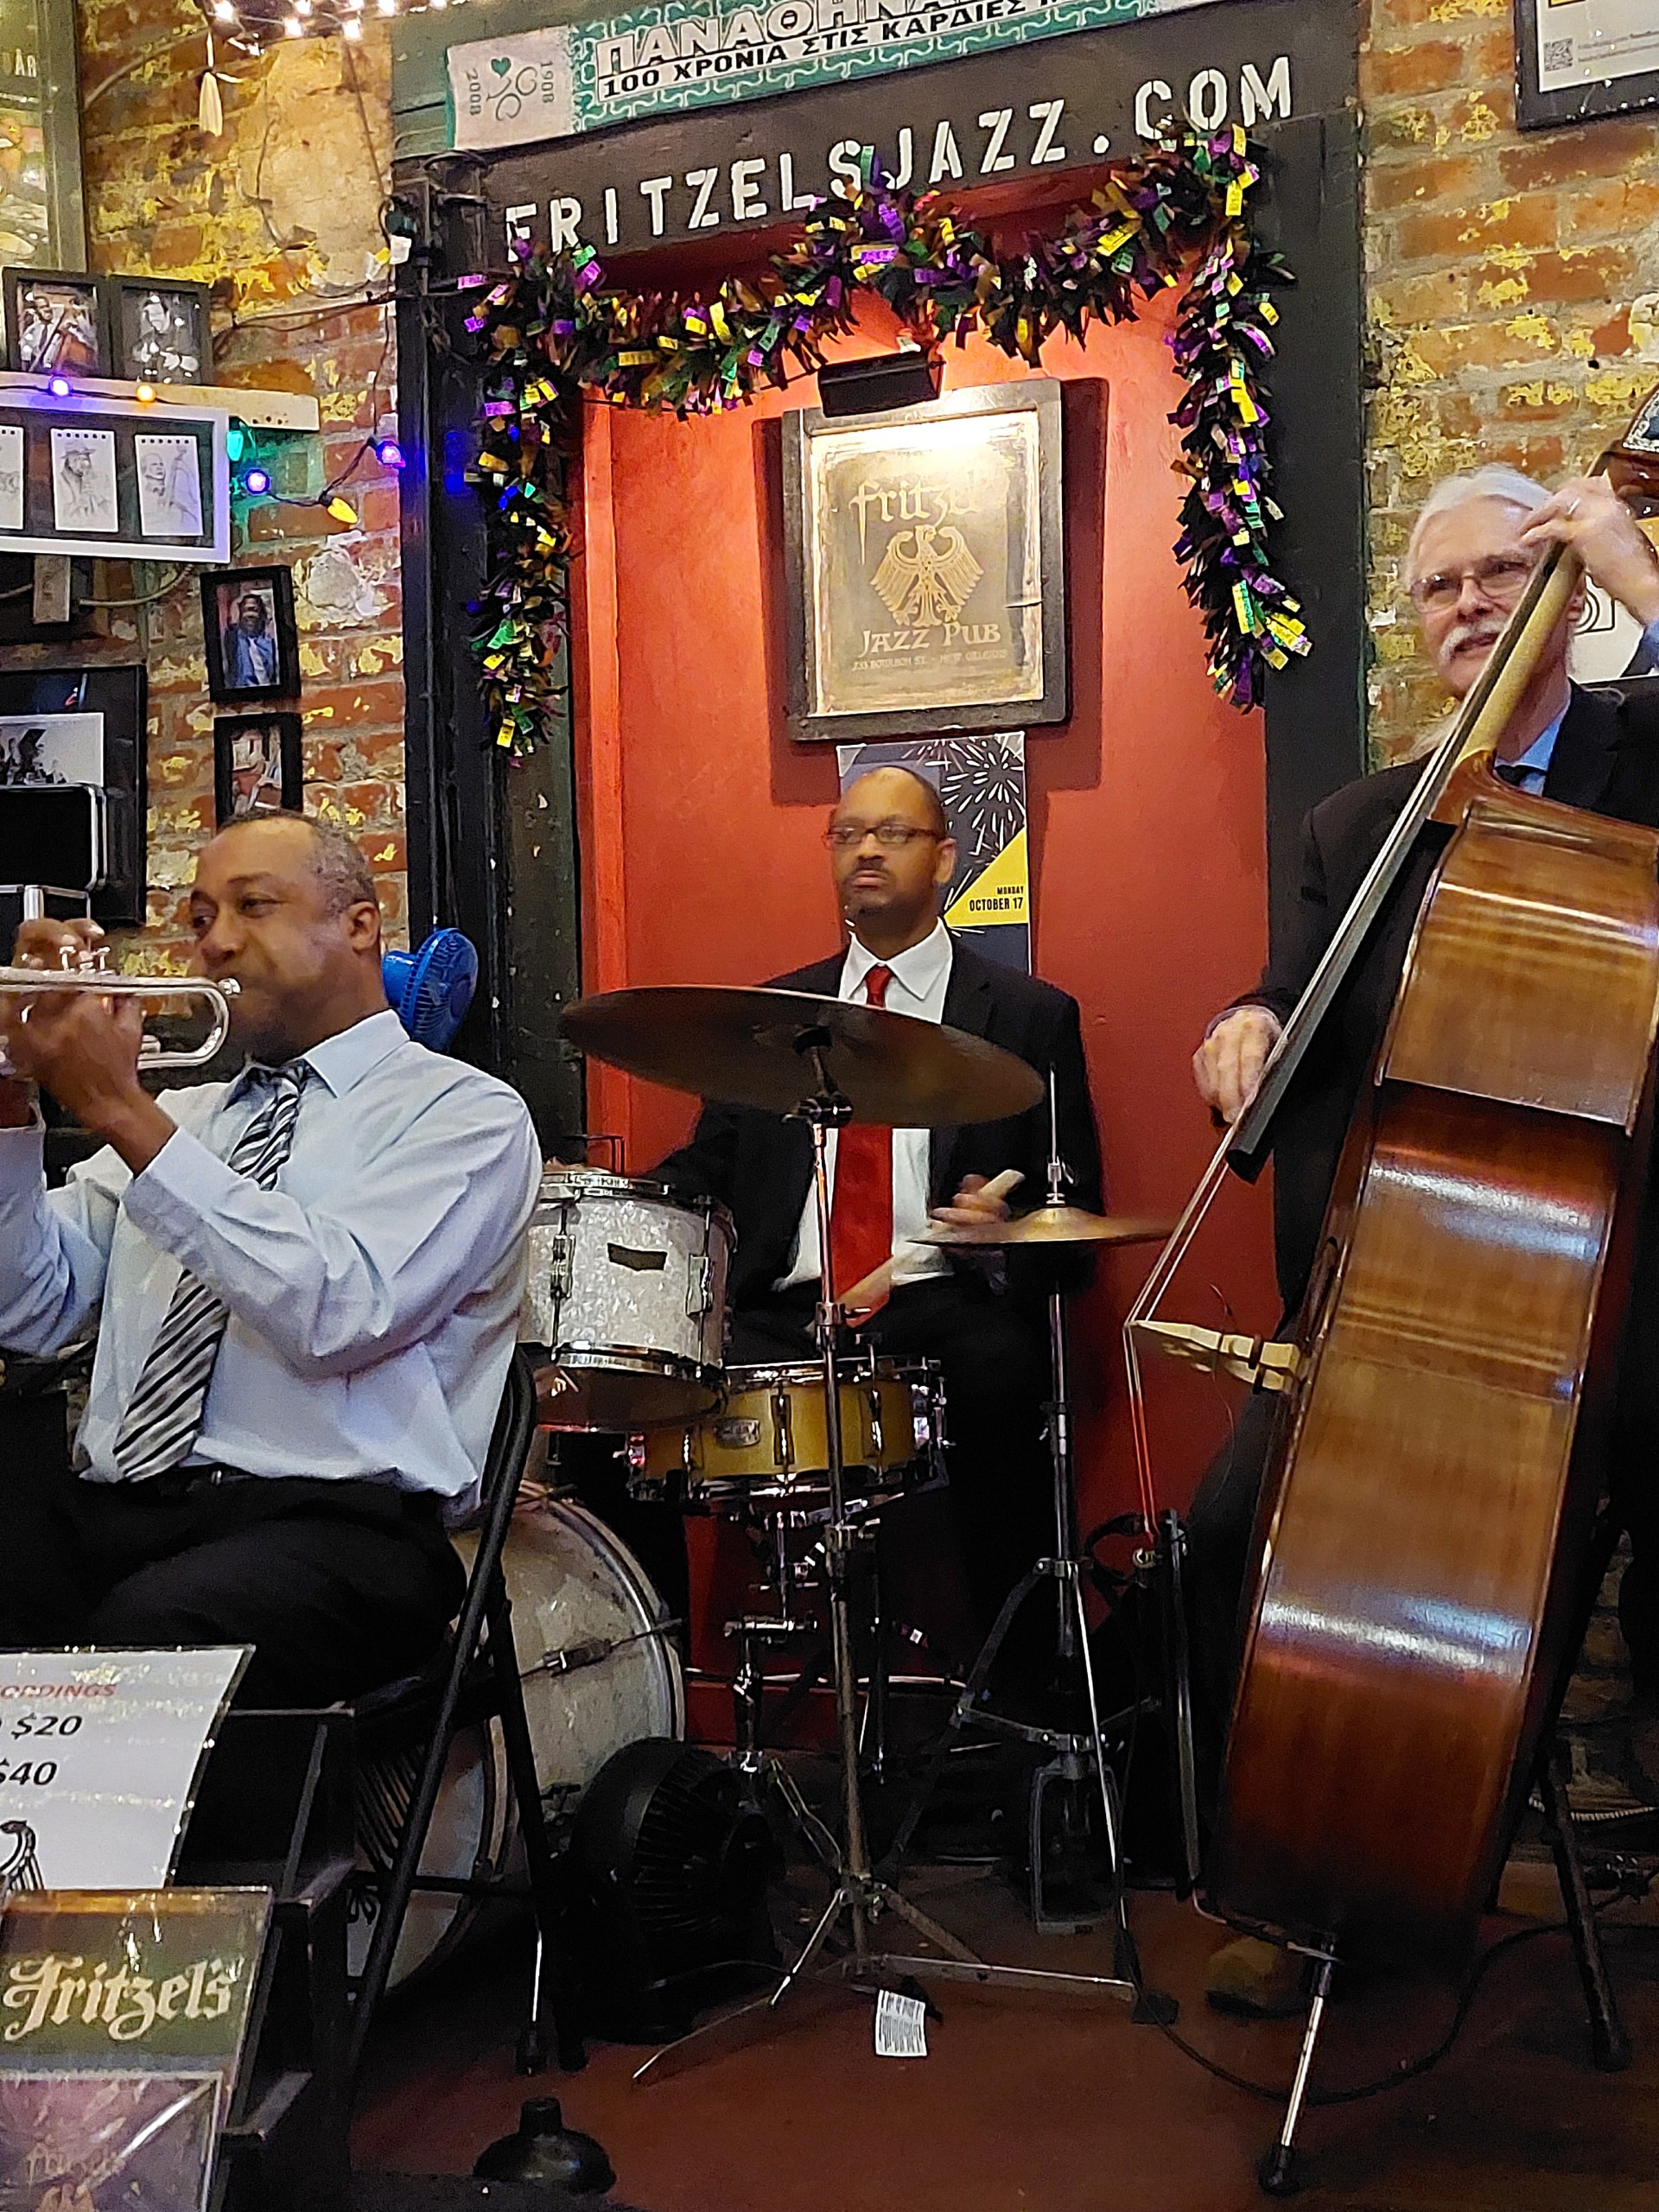 Jason Marsalis at Fritzel’s – an unexpected surprise drummer with Jamil Sharif (tp) and Jim Markway (bs)